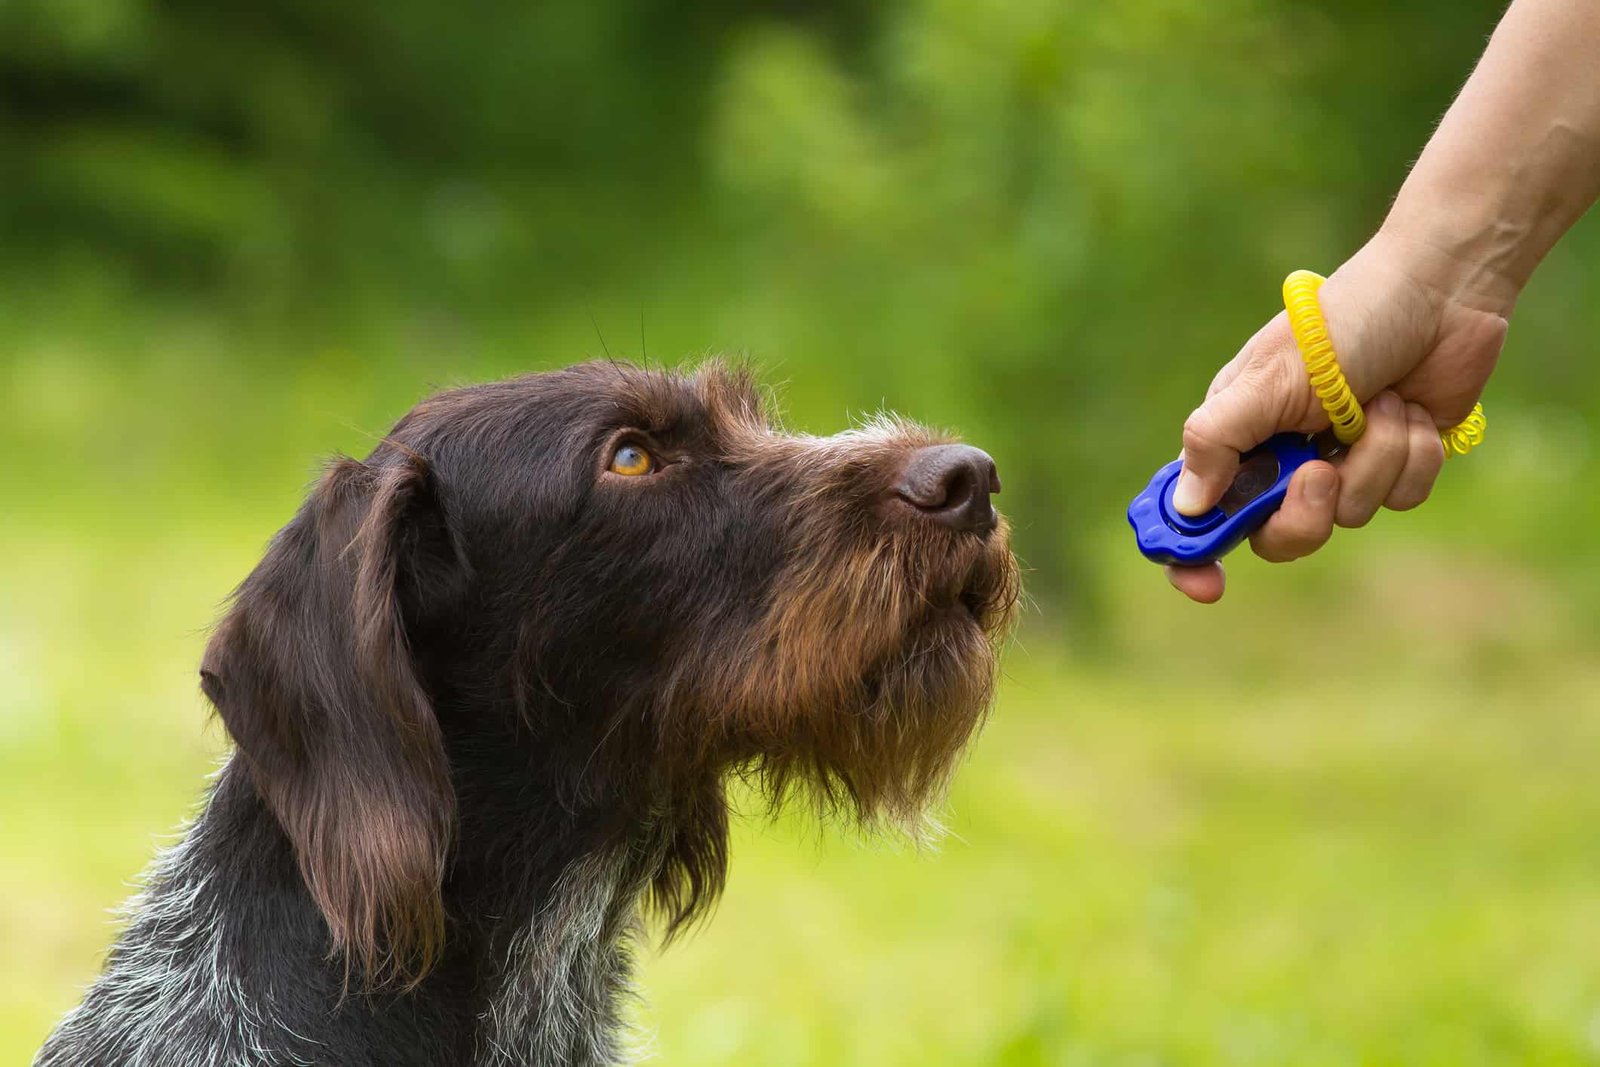 Clicker Training: Teaching Dogs Commands and Tricks